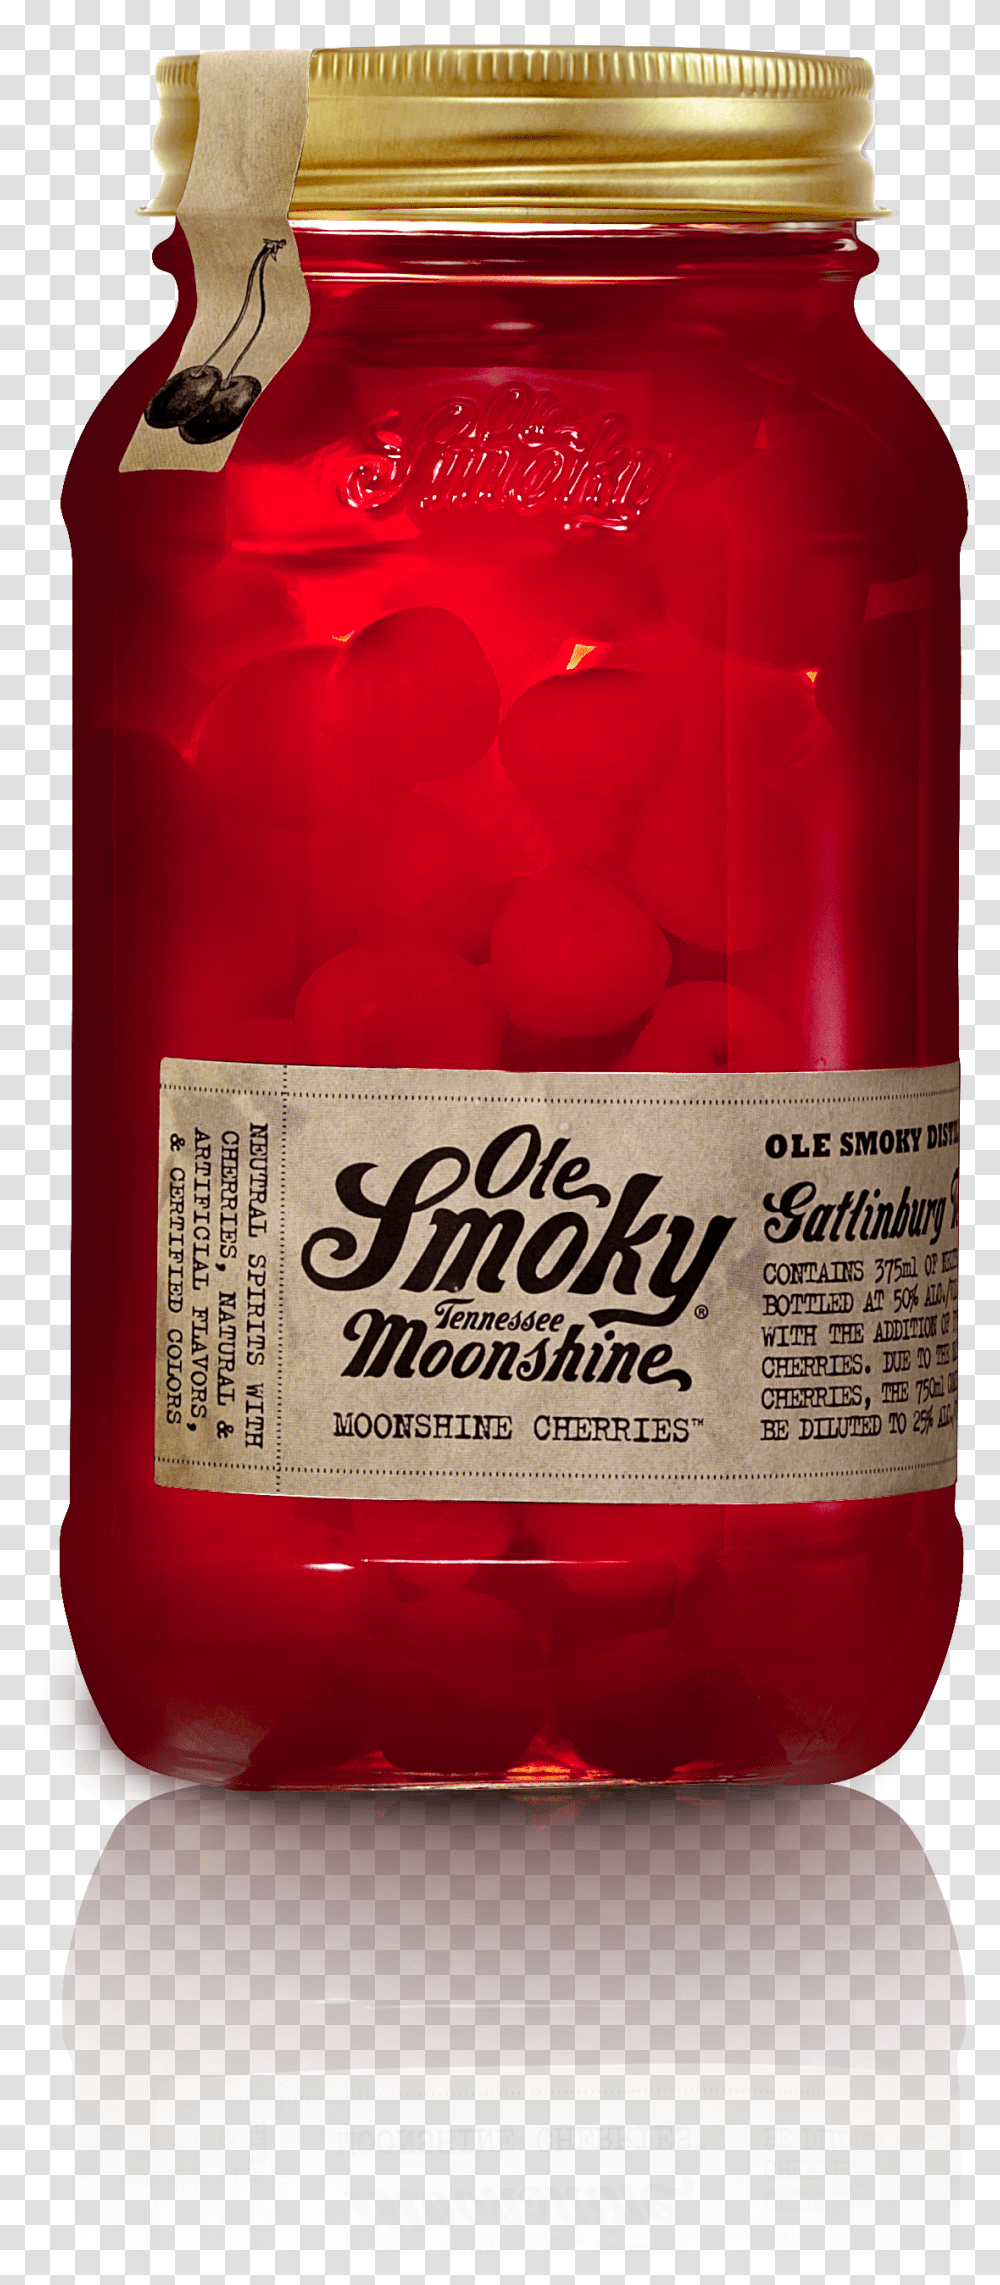 Flirt Away With These Ole Smoky Moonshine Cherries Wine, Liquor, Alcohol, Beverage, Bottle Transparent Png